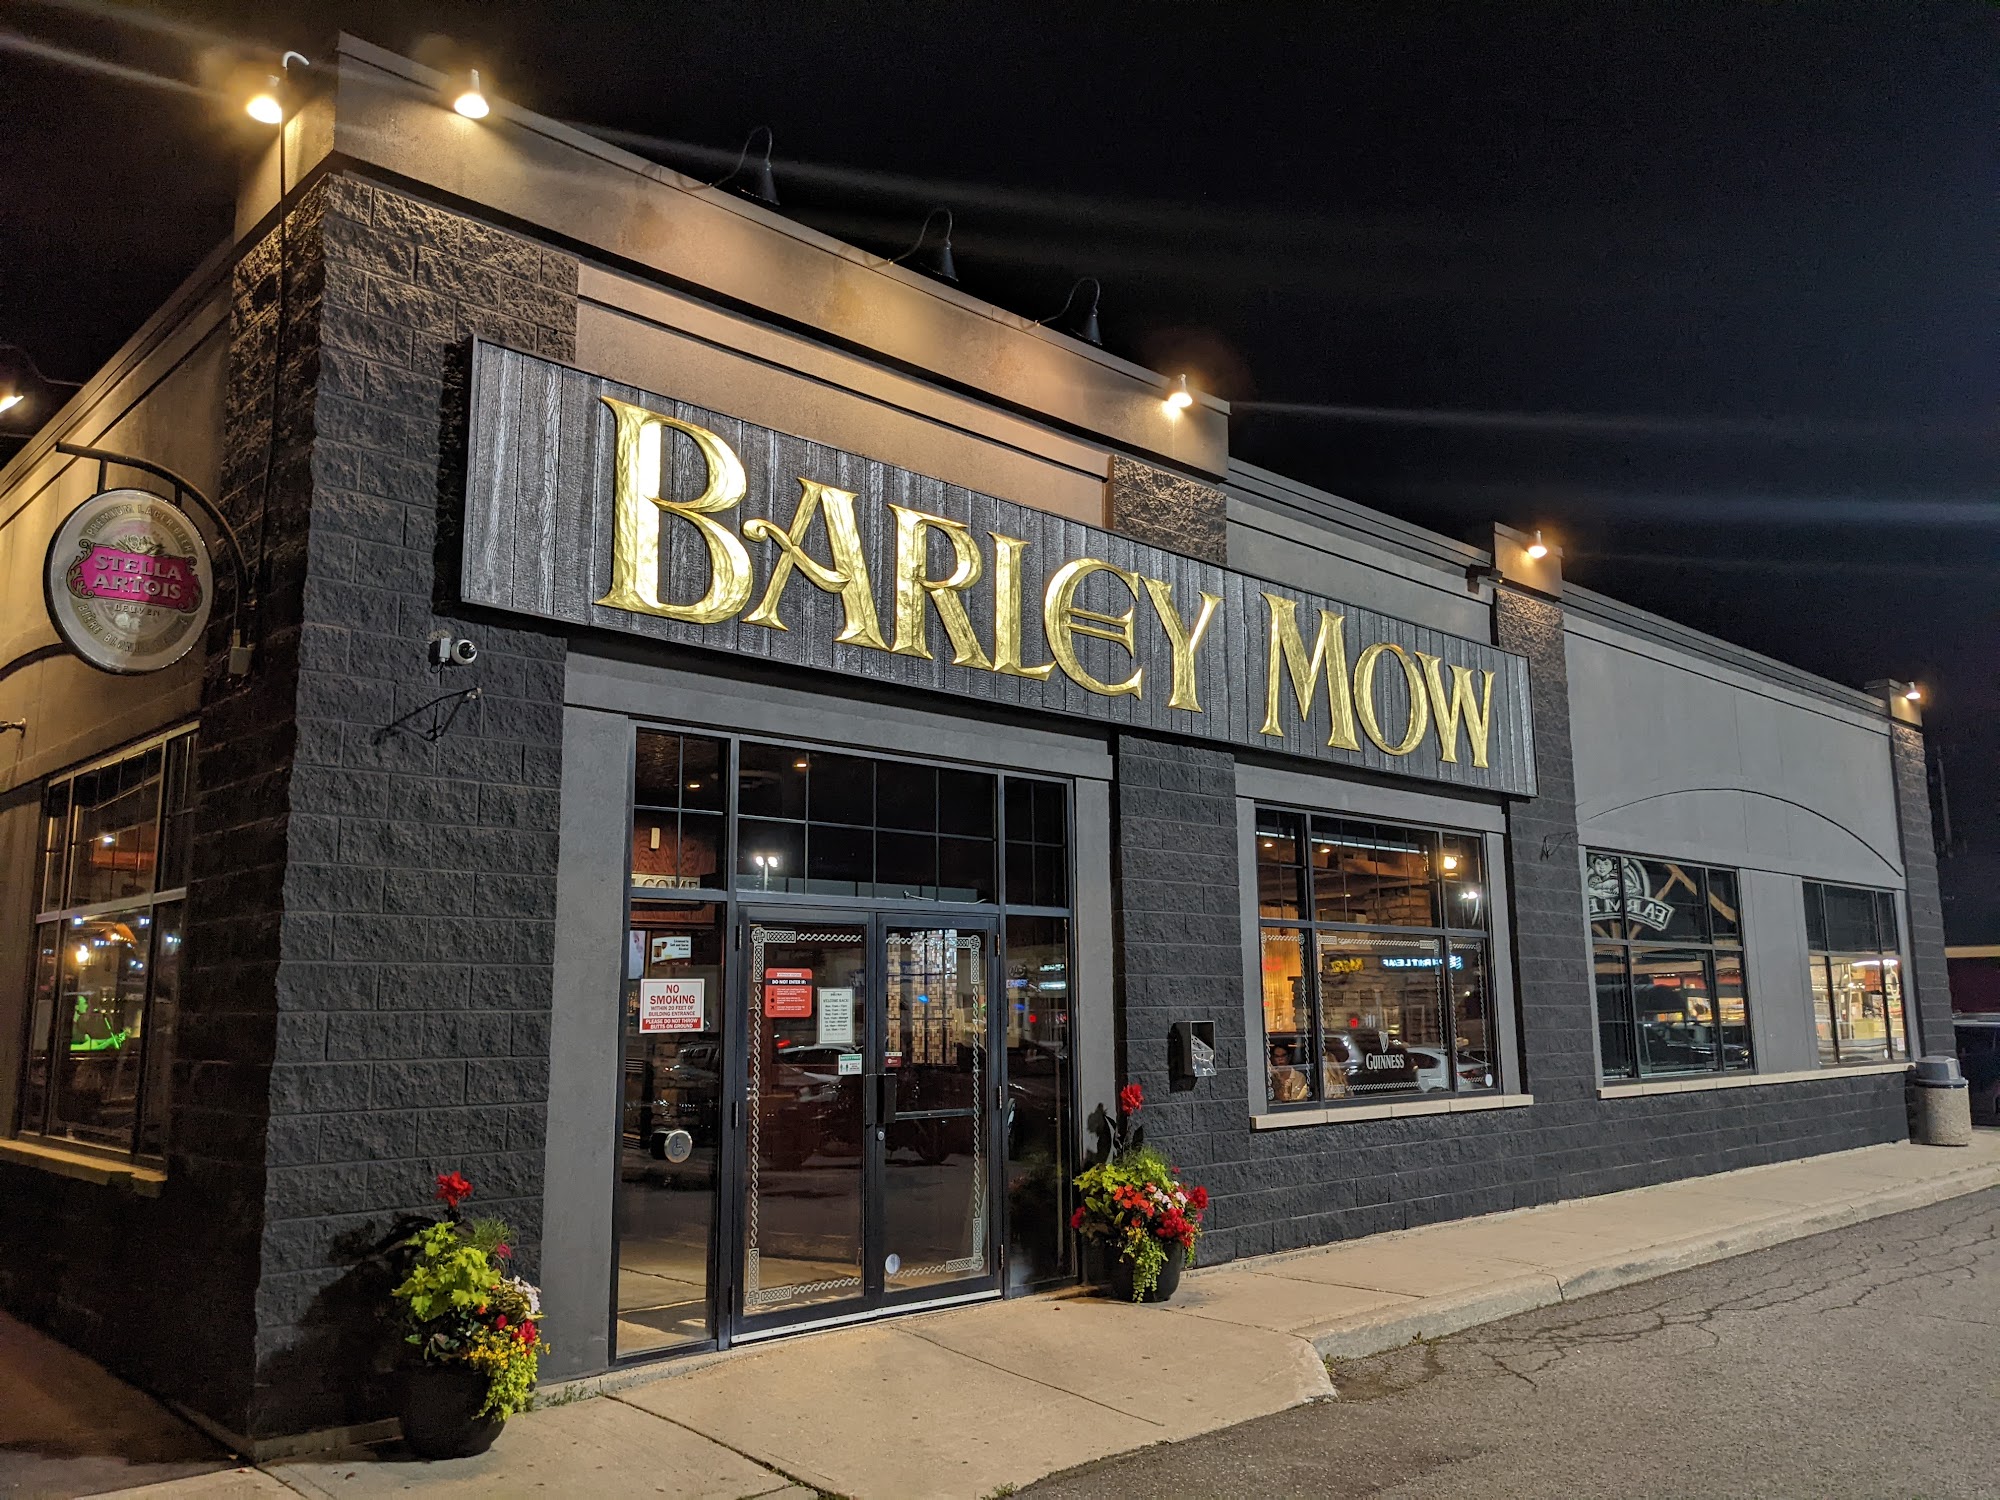 The Barley Mow Orleans